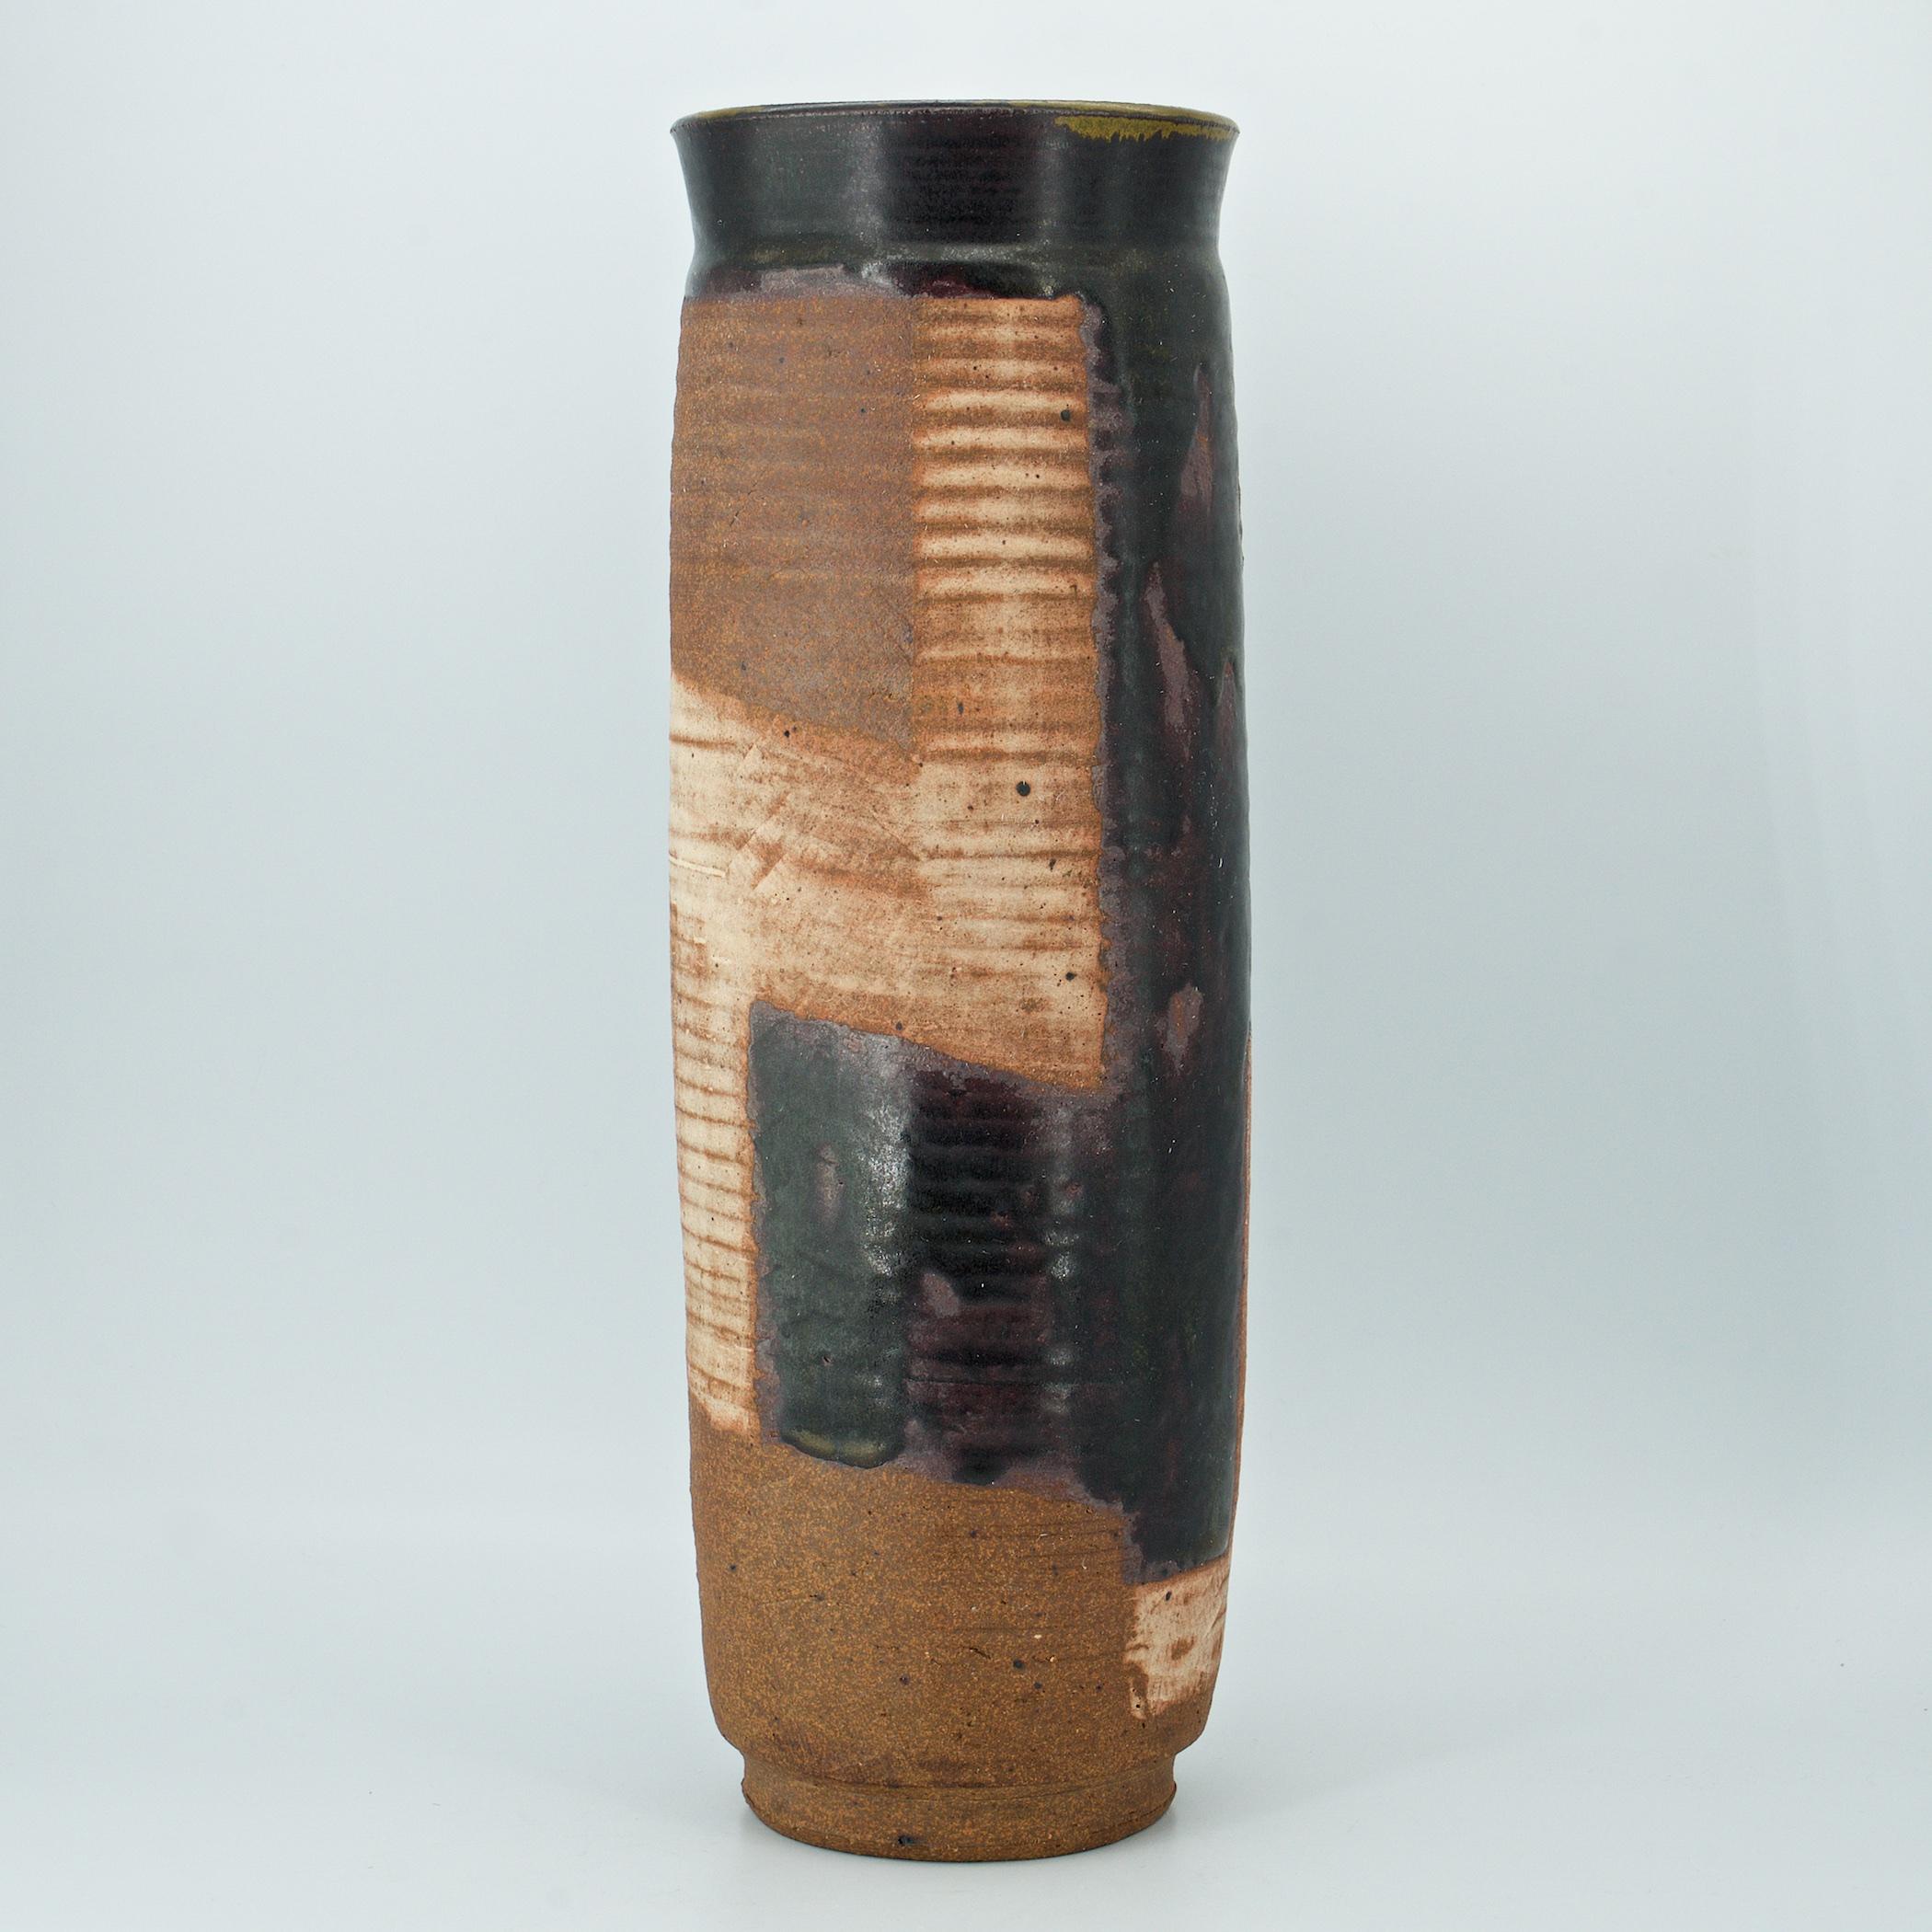 Wonderful hand-thrown abstract glazed ceramic flower vase. Over 15 inches tall.